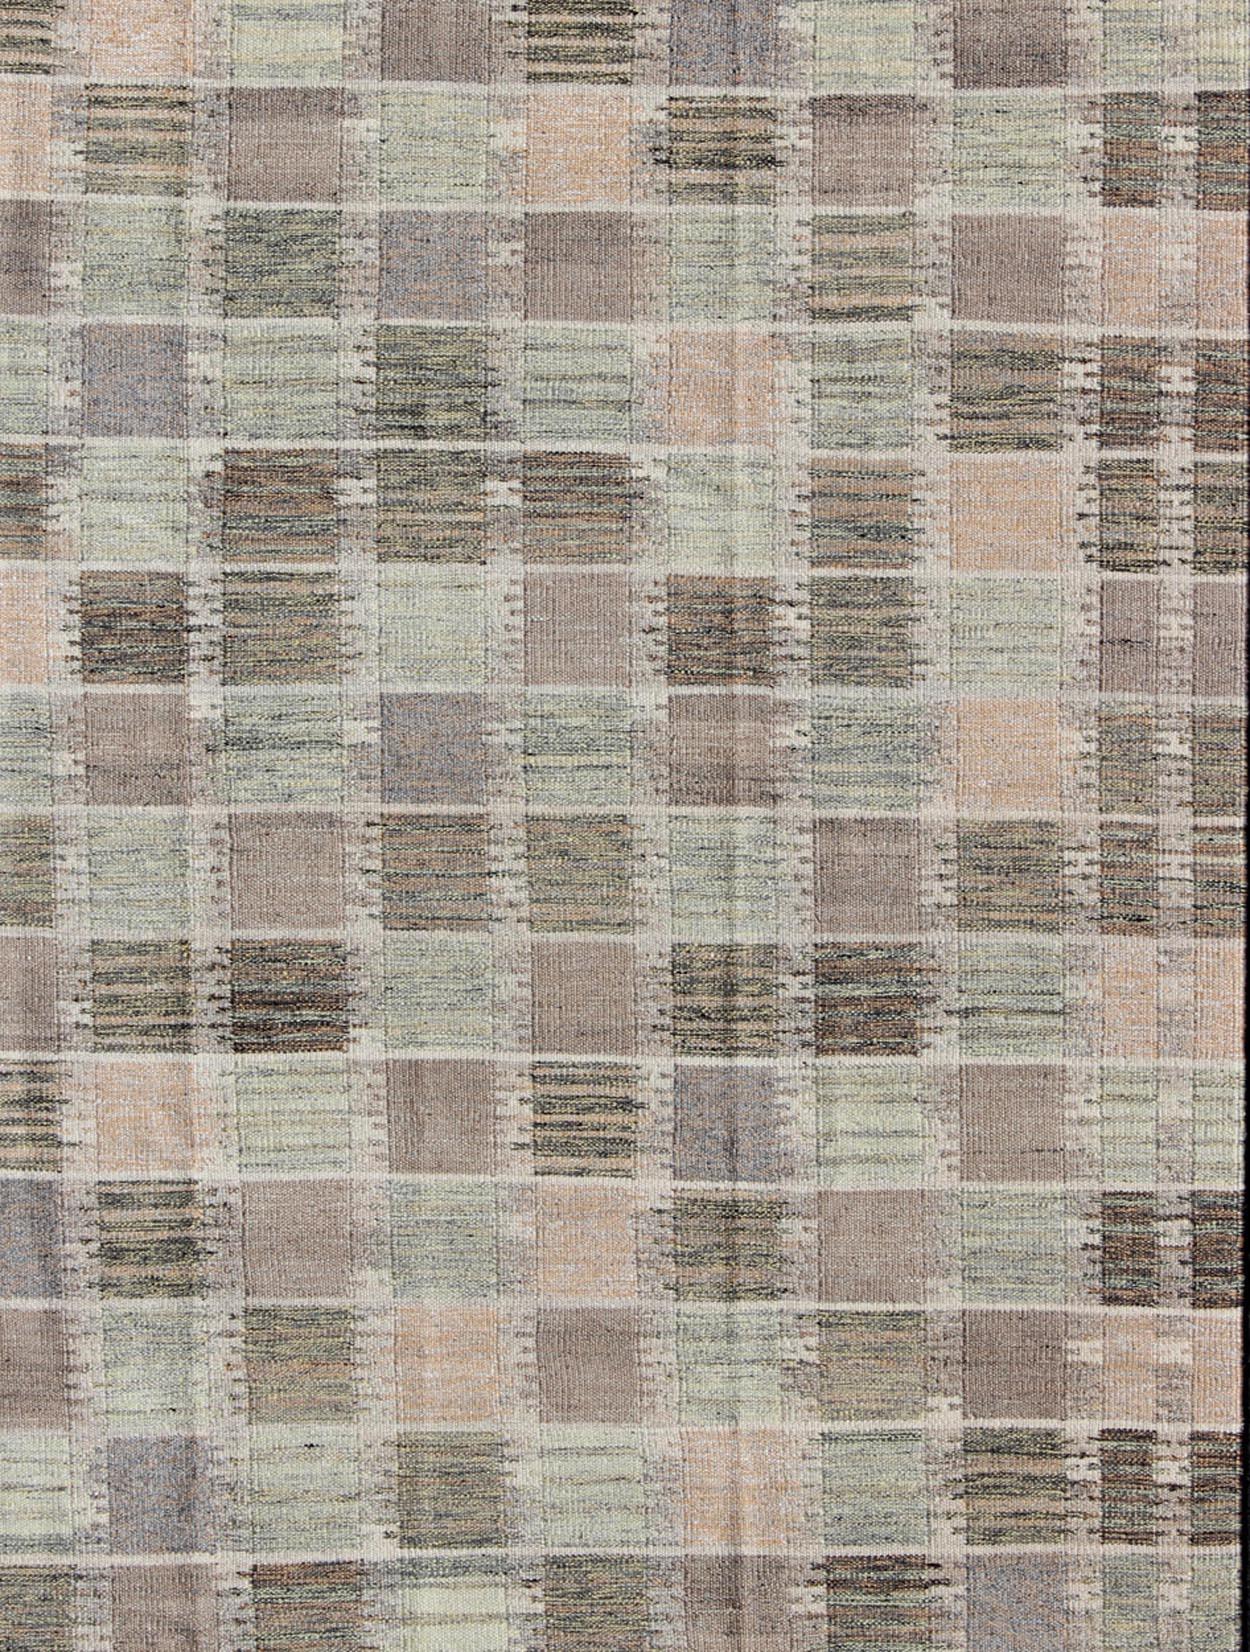 Indian Modern Checkerboard or Patchwork Scandinavian Flat Weave Rug in Neutral Colors For Sale